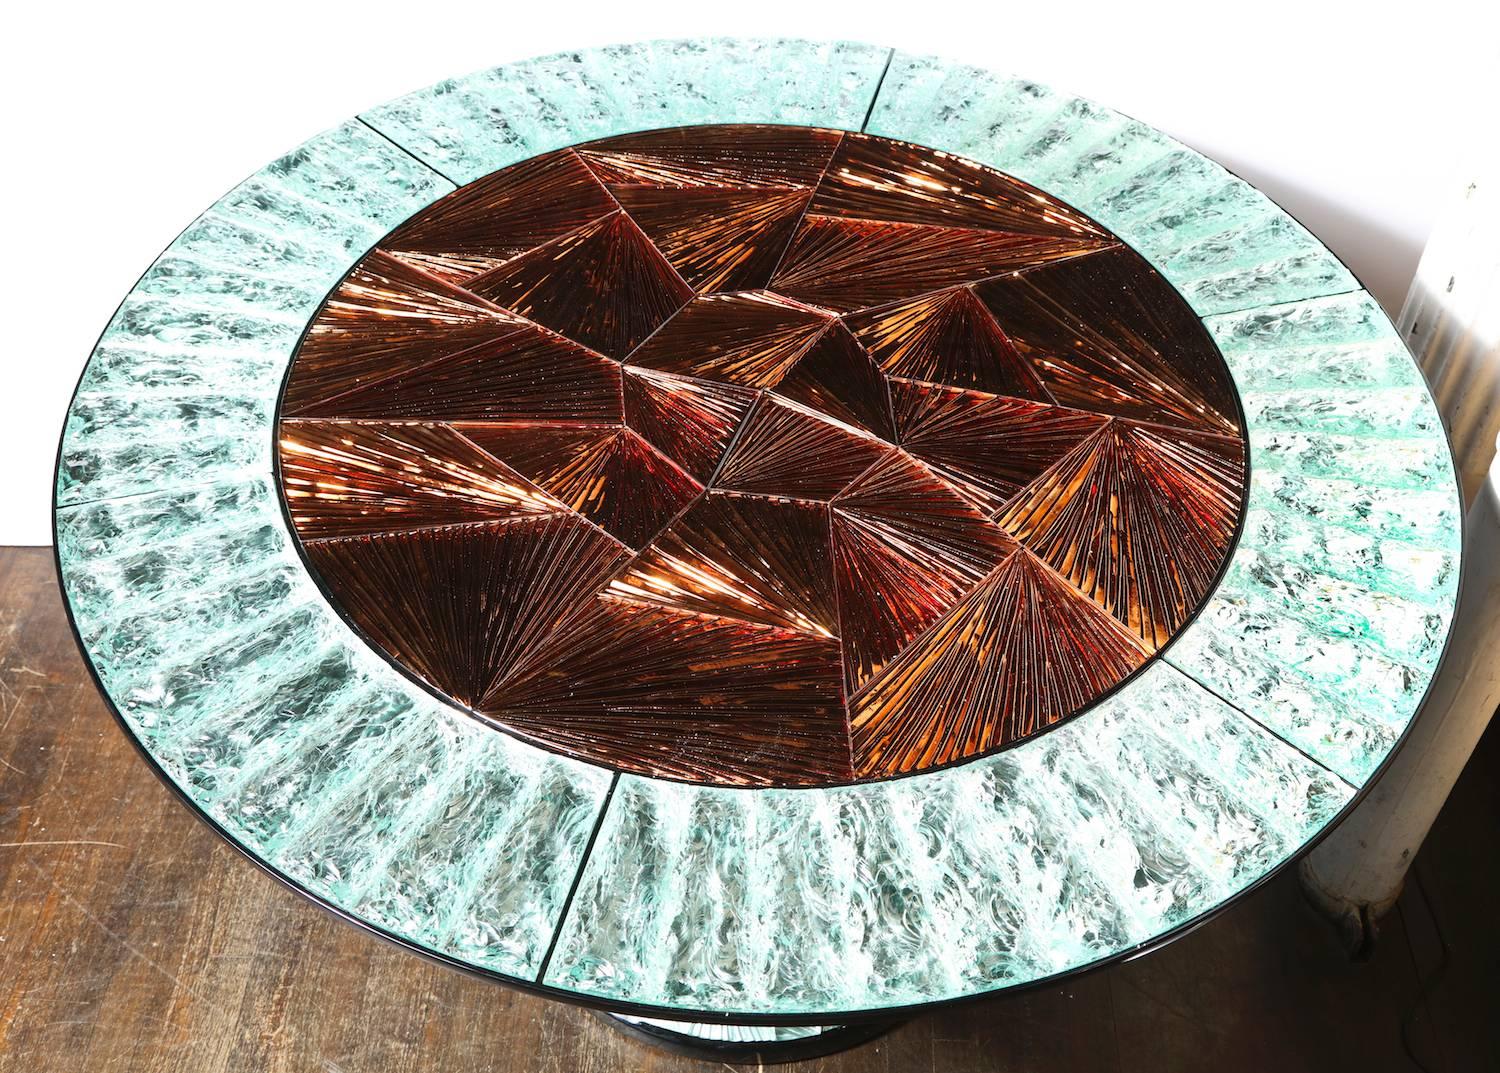 Unique center table by Donzella & Ghiró Studio. Circular pedestal table of black lacquered wood support with inset, hand-carved and chiseled glass elements throughout. An incredible example of the craftsmanship of Ghiró Studio and their